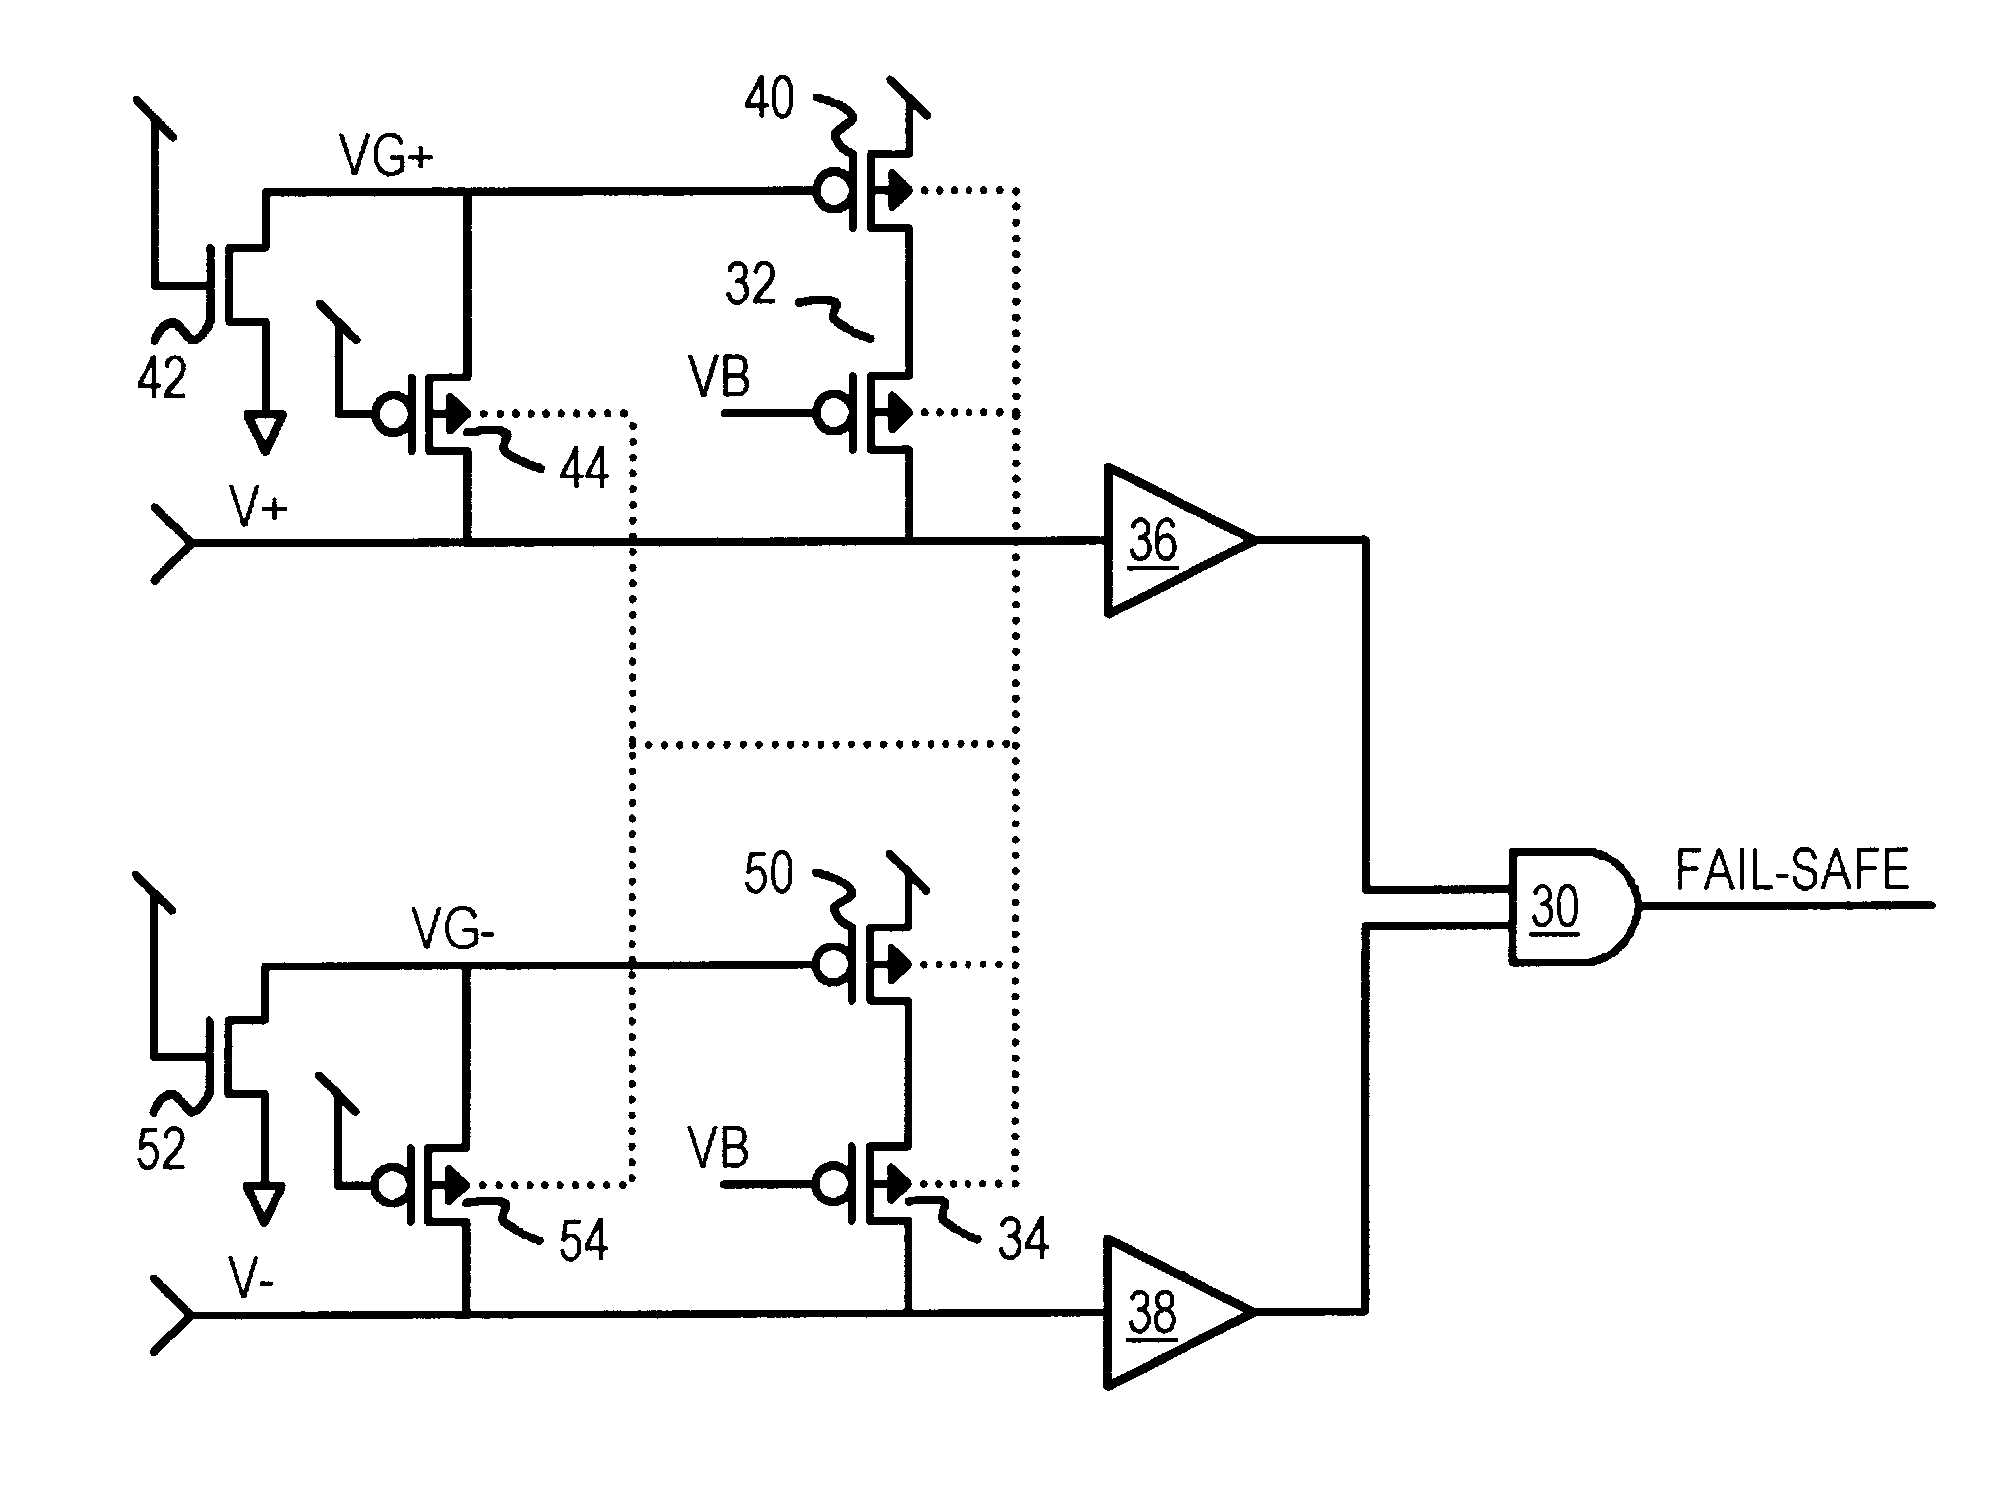 Fail-safe circuit with low input impedance using active-transistor differential-line terminators